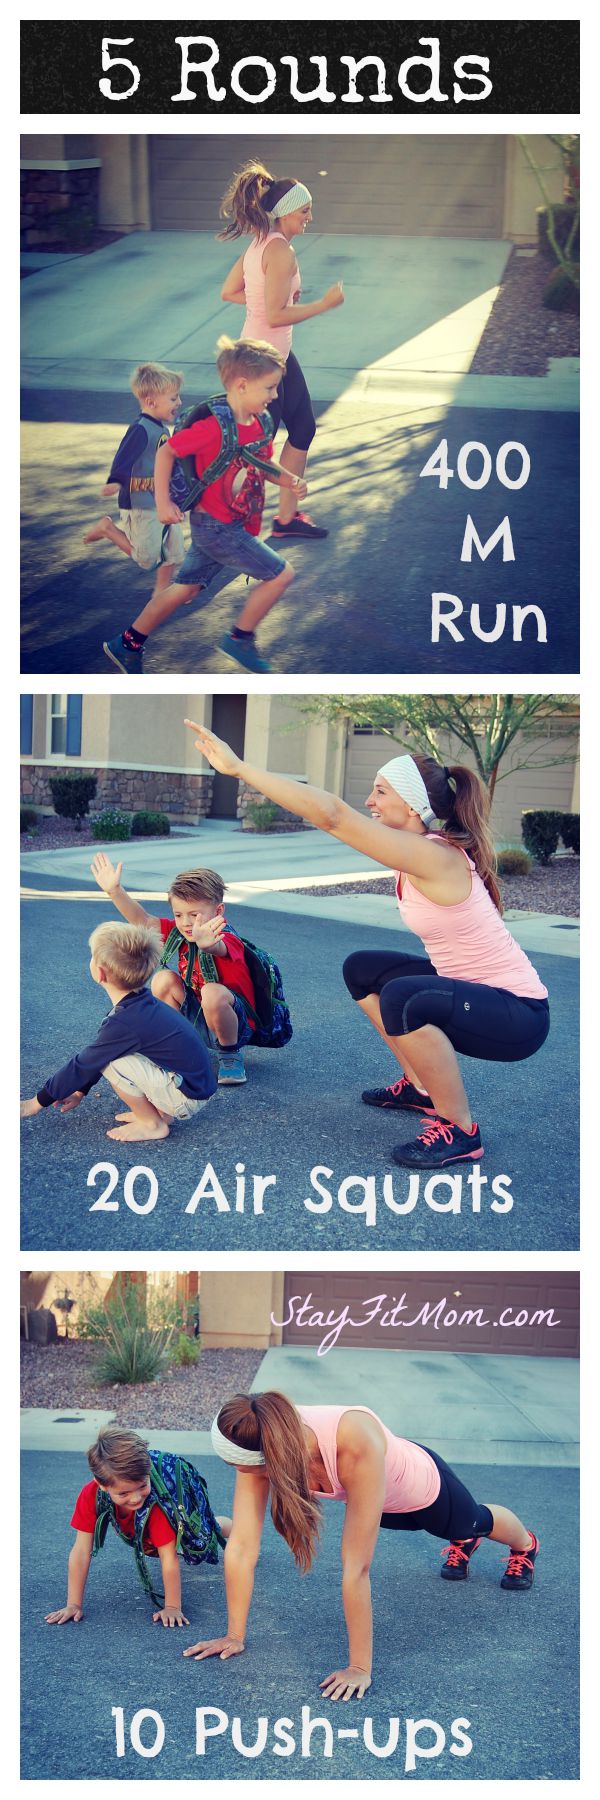 At home CrossFit Workouts you can do with your kids around from StayFitMom.com!